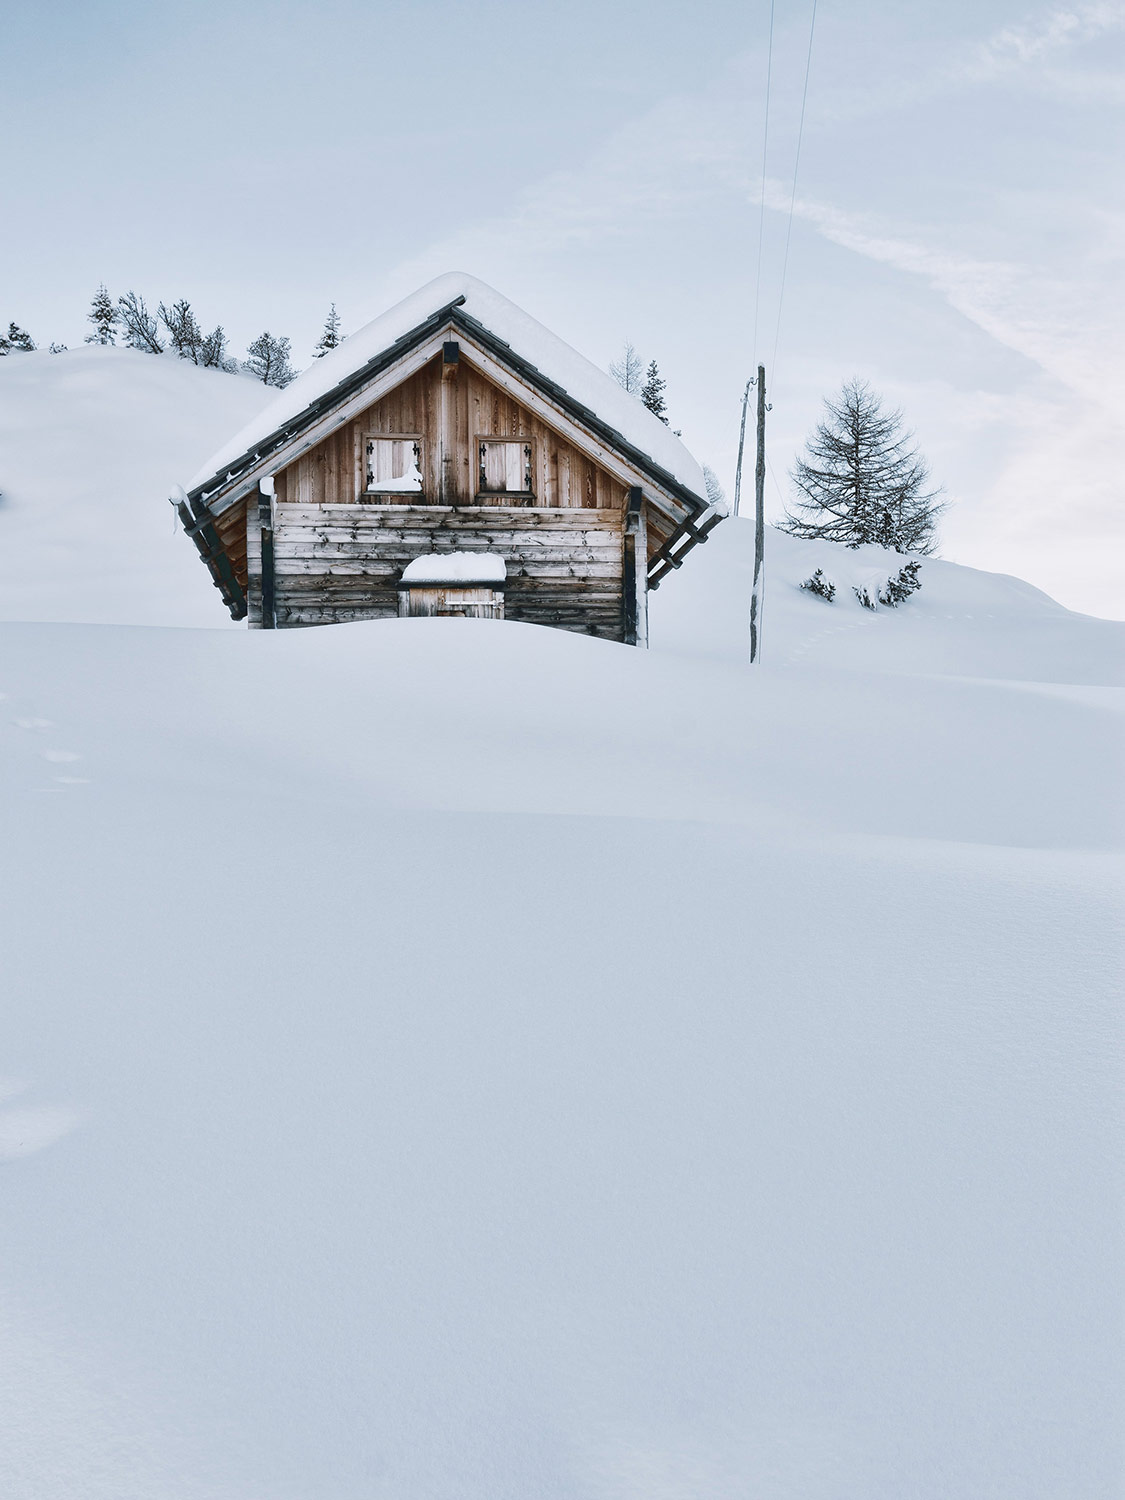 A wooden cabin on snowy hills